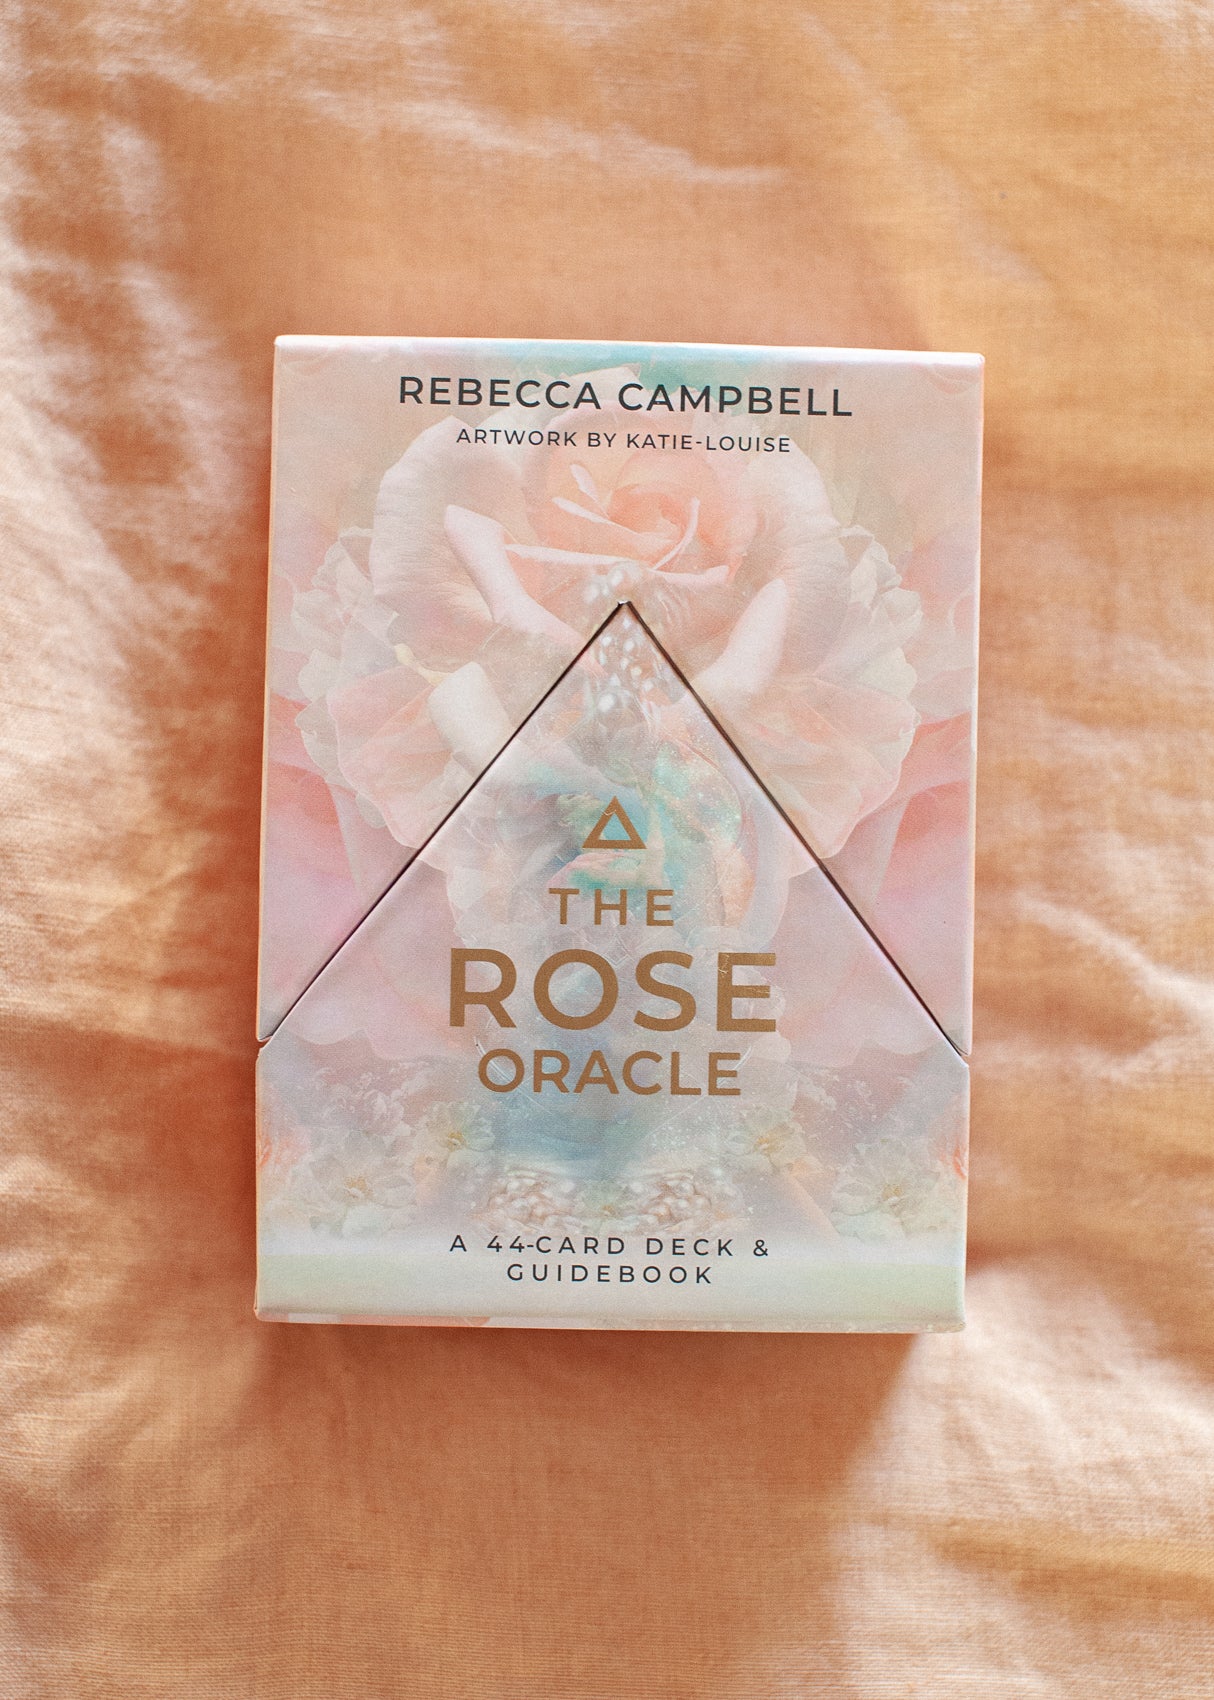 The Rose Oracle by Rebecca Campbell